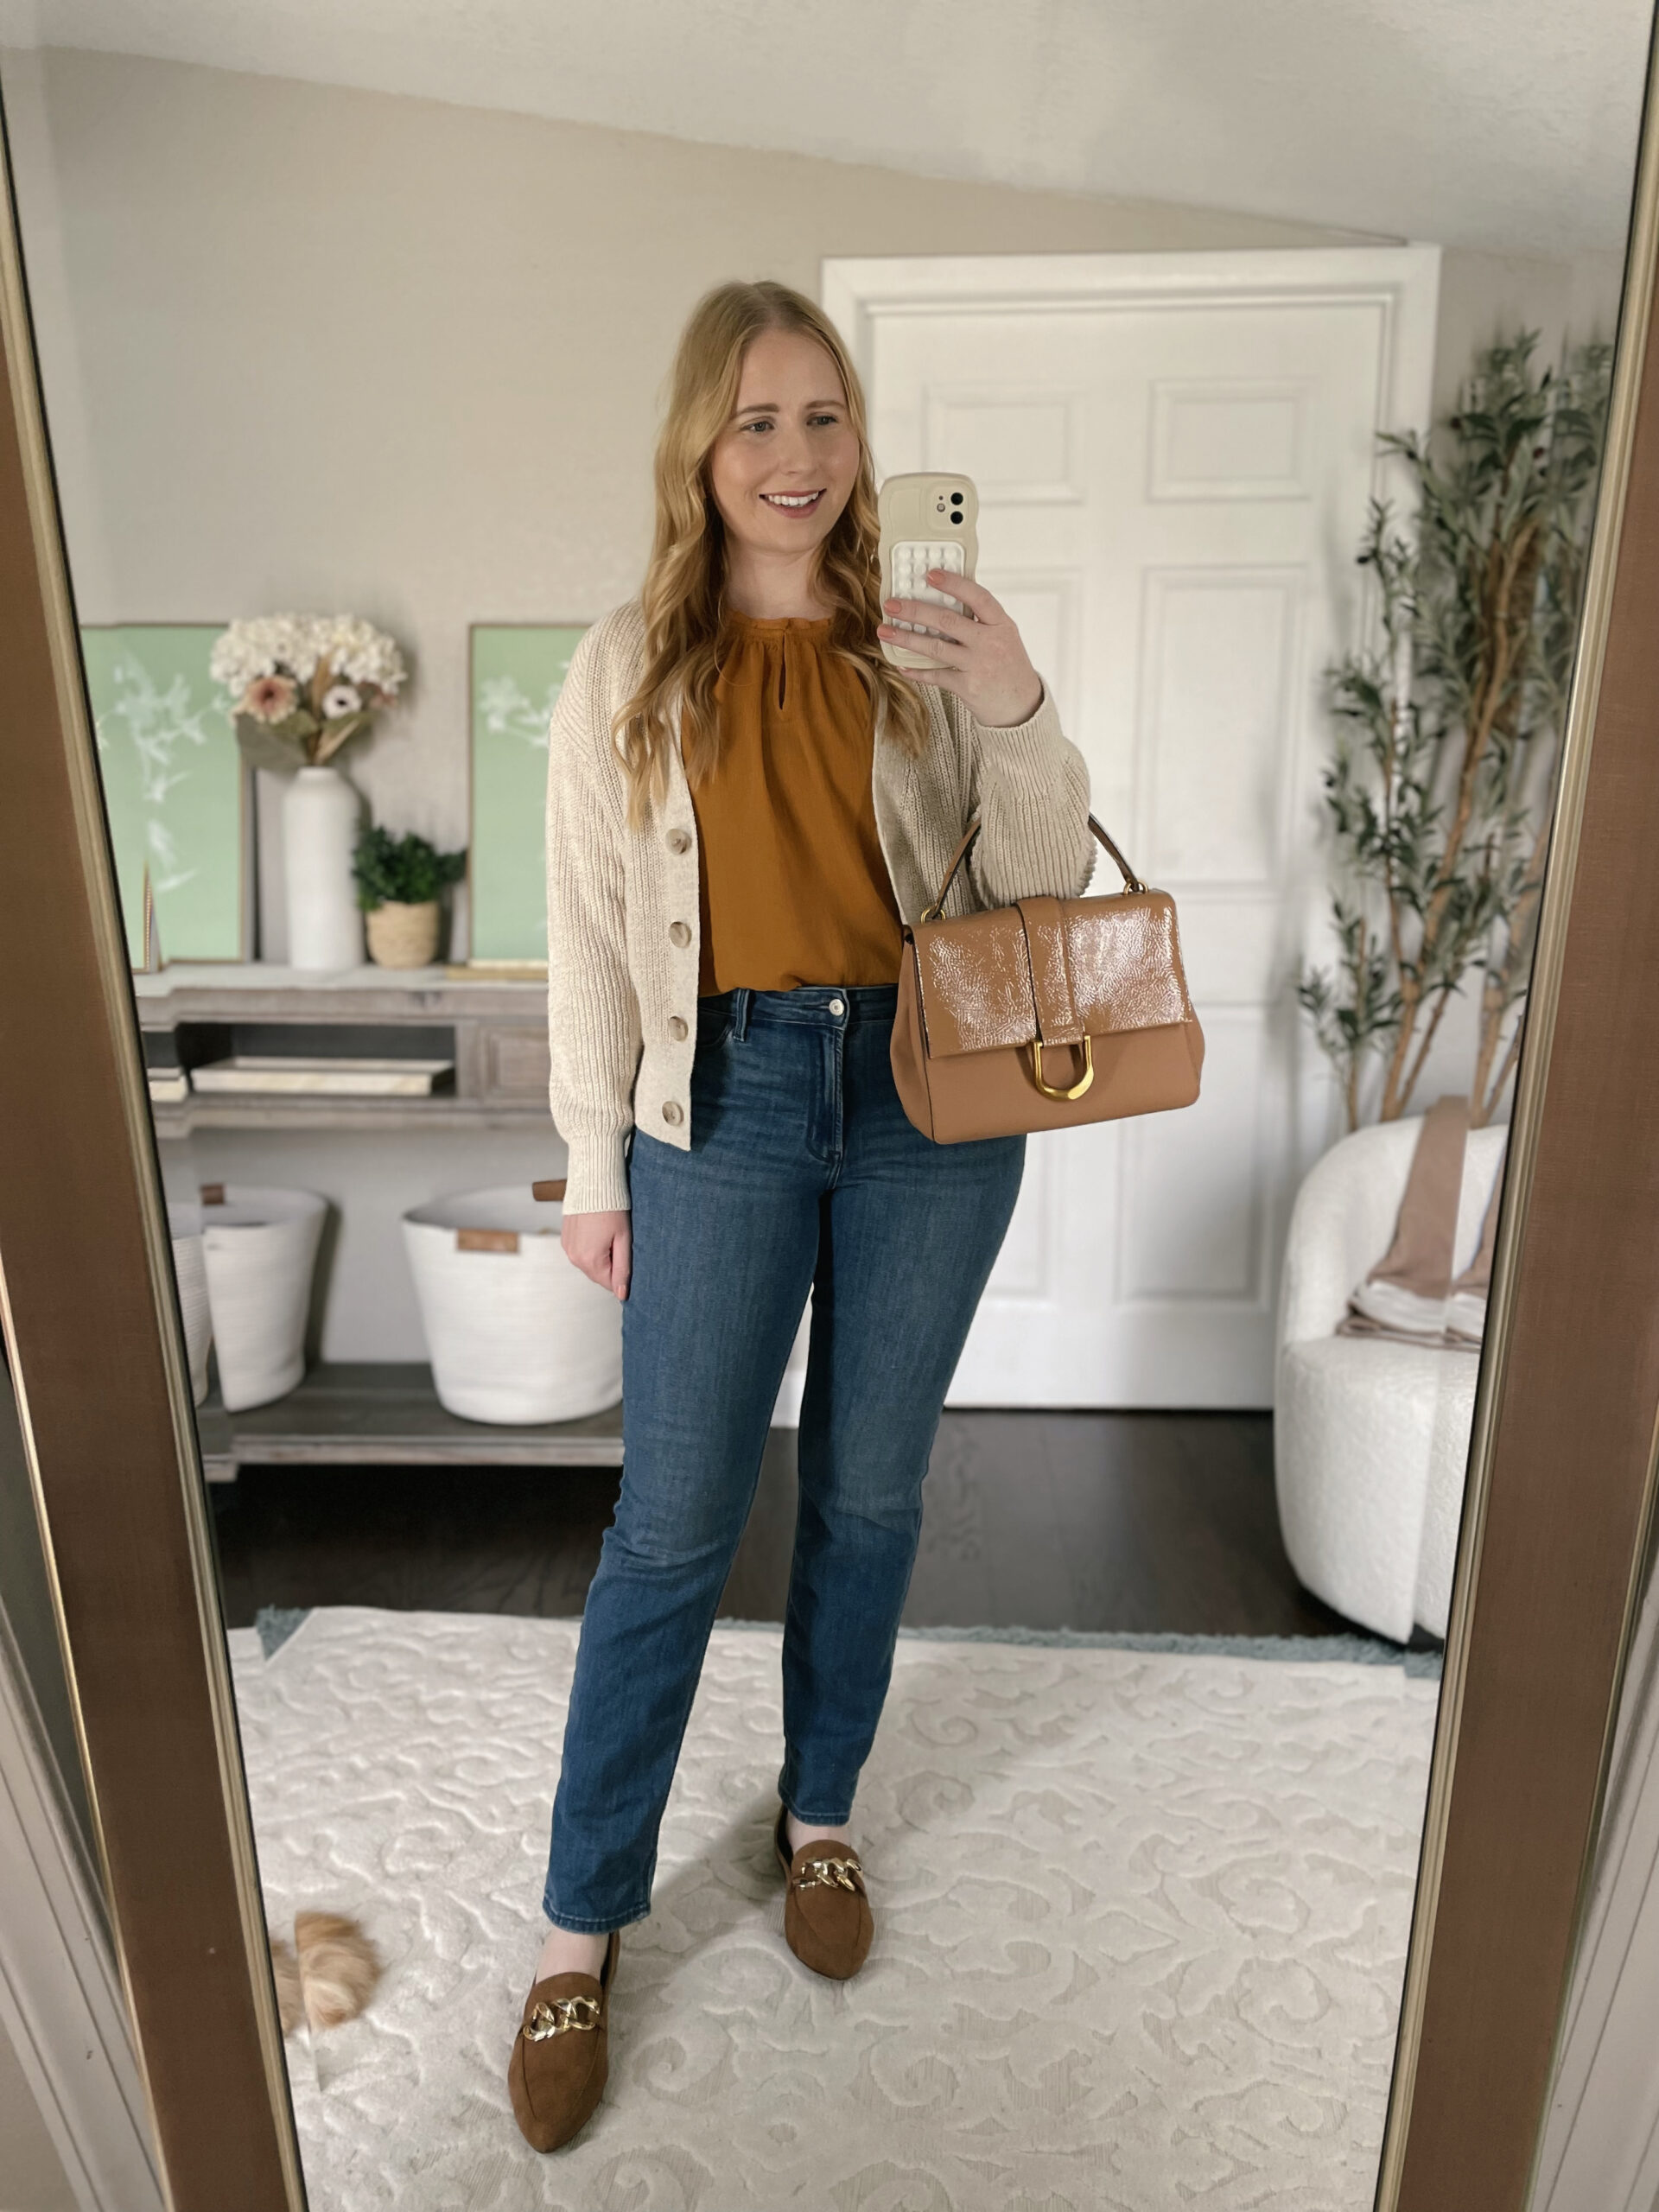 Back To School Teacher's Outfit Edition 2023 | Autumn Teacher Outfits - Comfortable & Trendy Clothing | Fall Teacher Outfit Ideas on a Budget